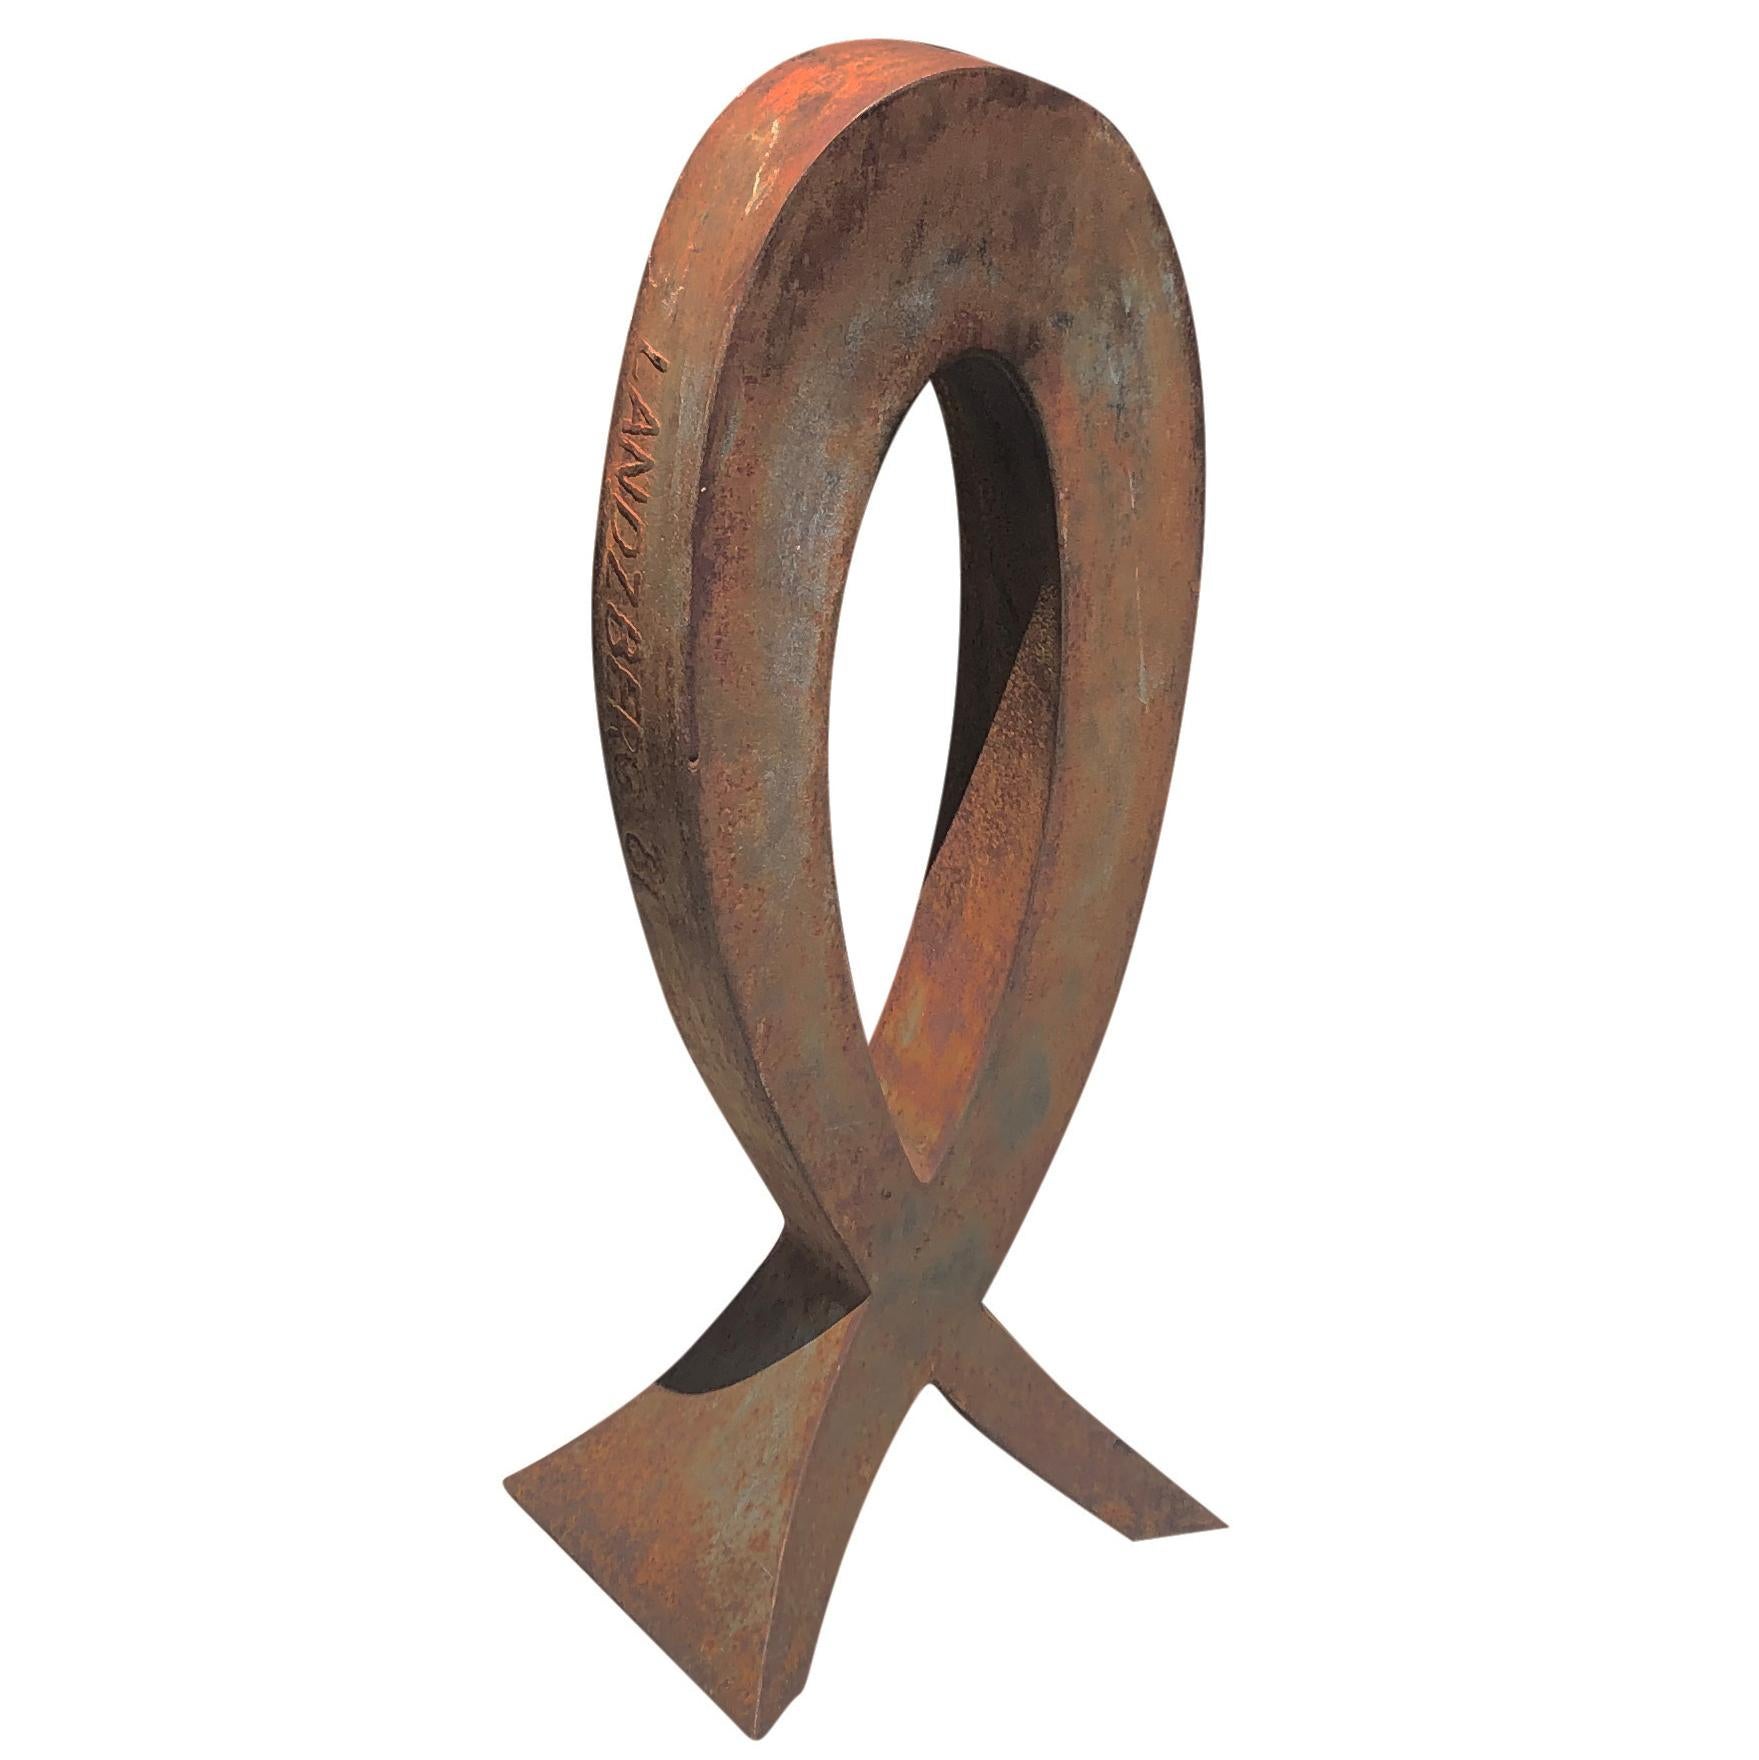 A vintage Brutalist American shaped velvet steel sculpture, designed by Ali Landsberg in good condition. Wear consistent with age and use, circa 1970 - 1980, United States.

Ali Landsberg was an American sculptor and designer, born and passed away